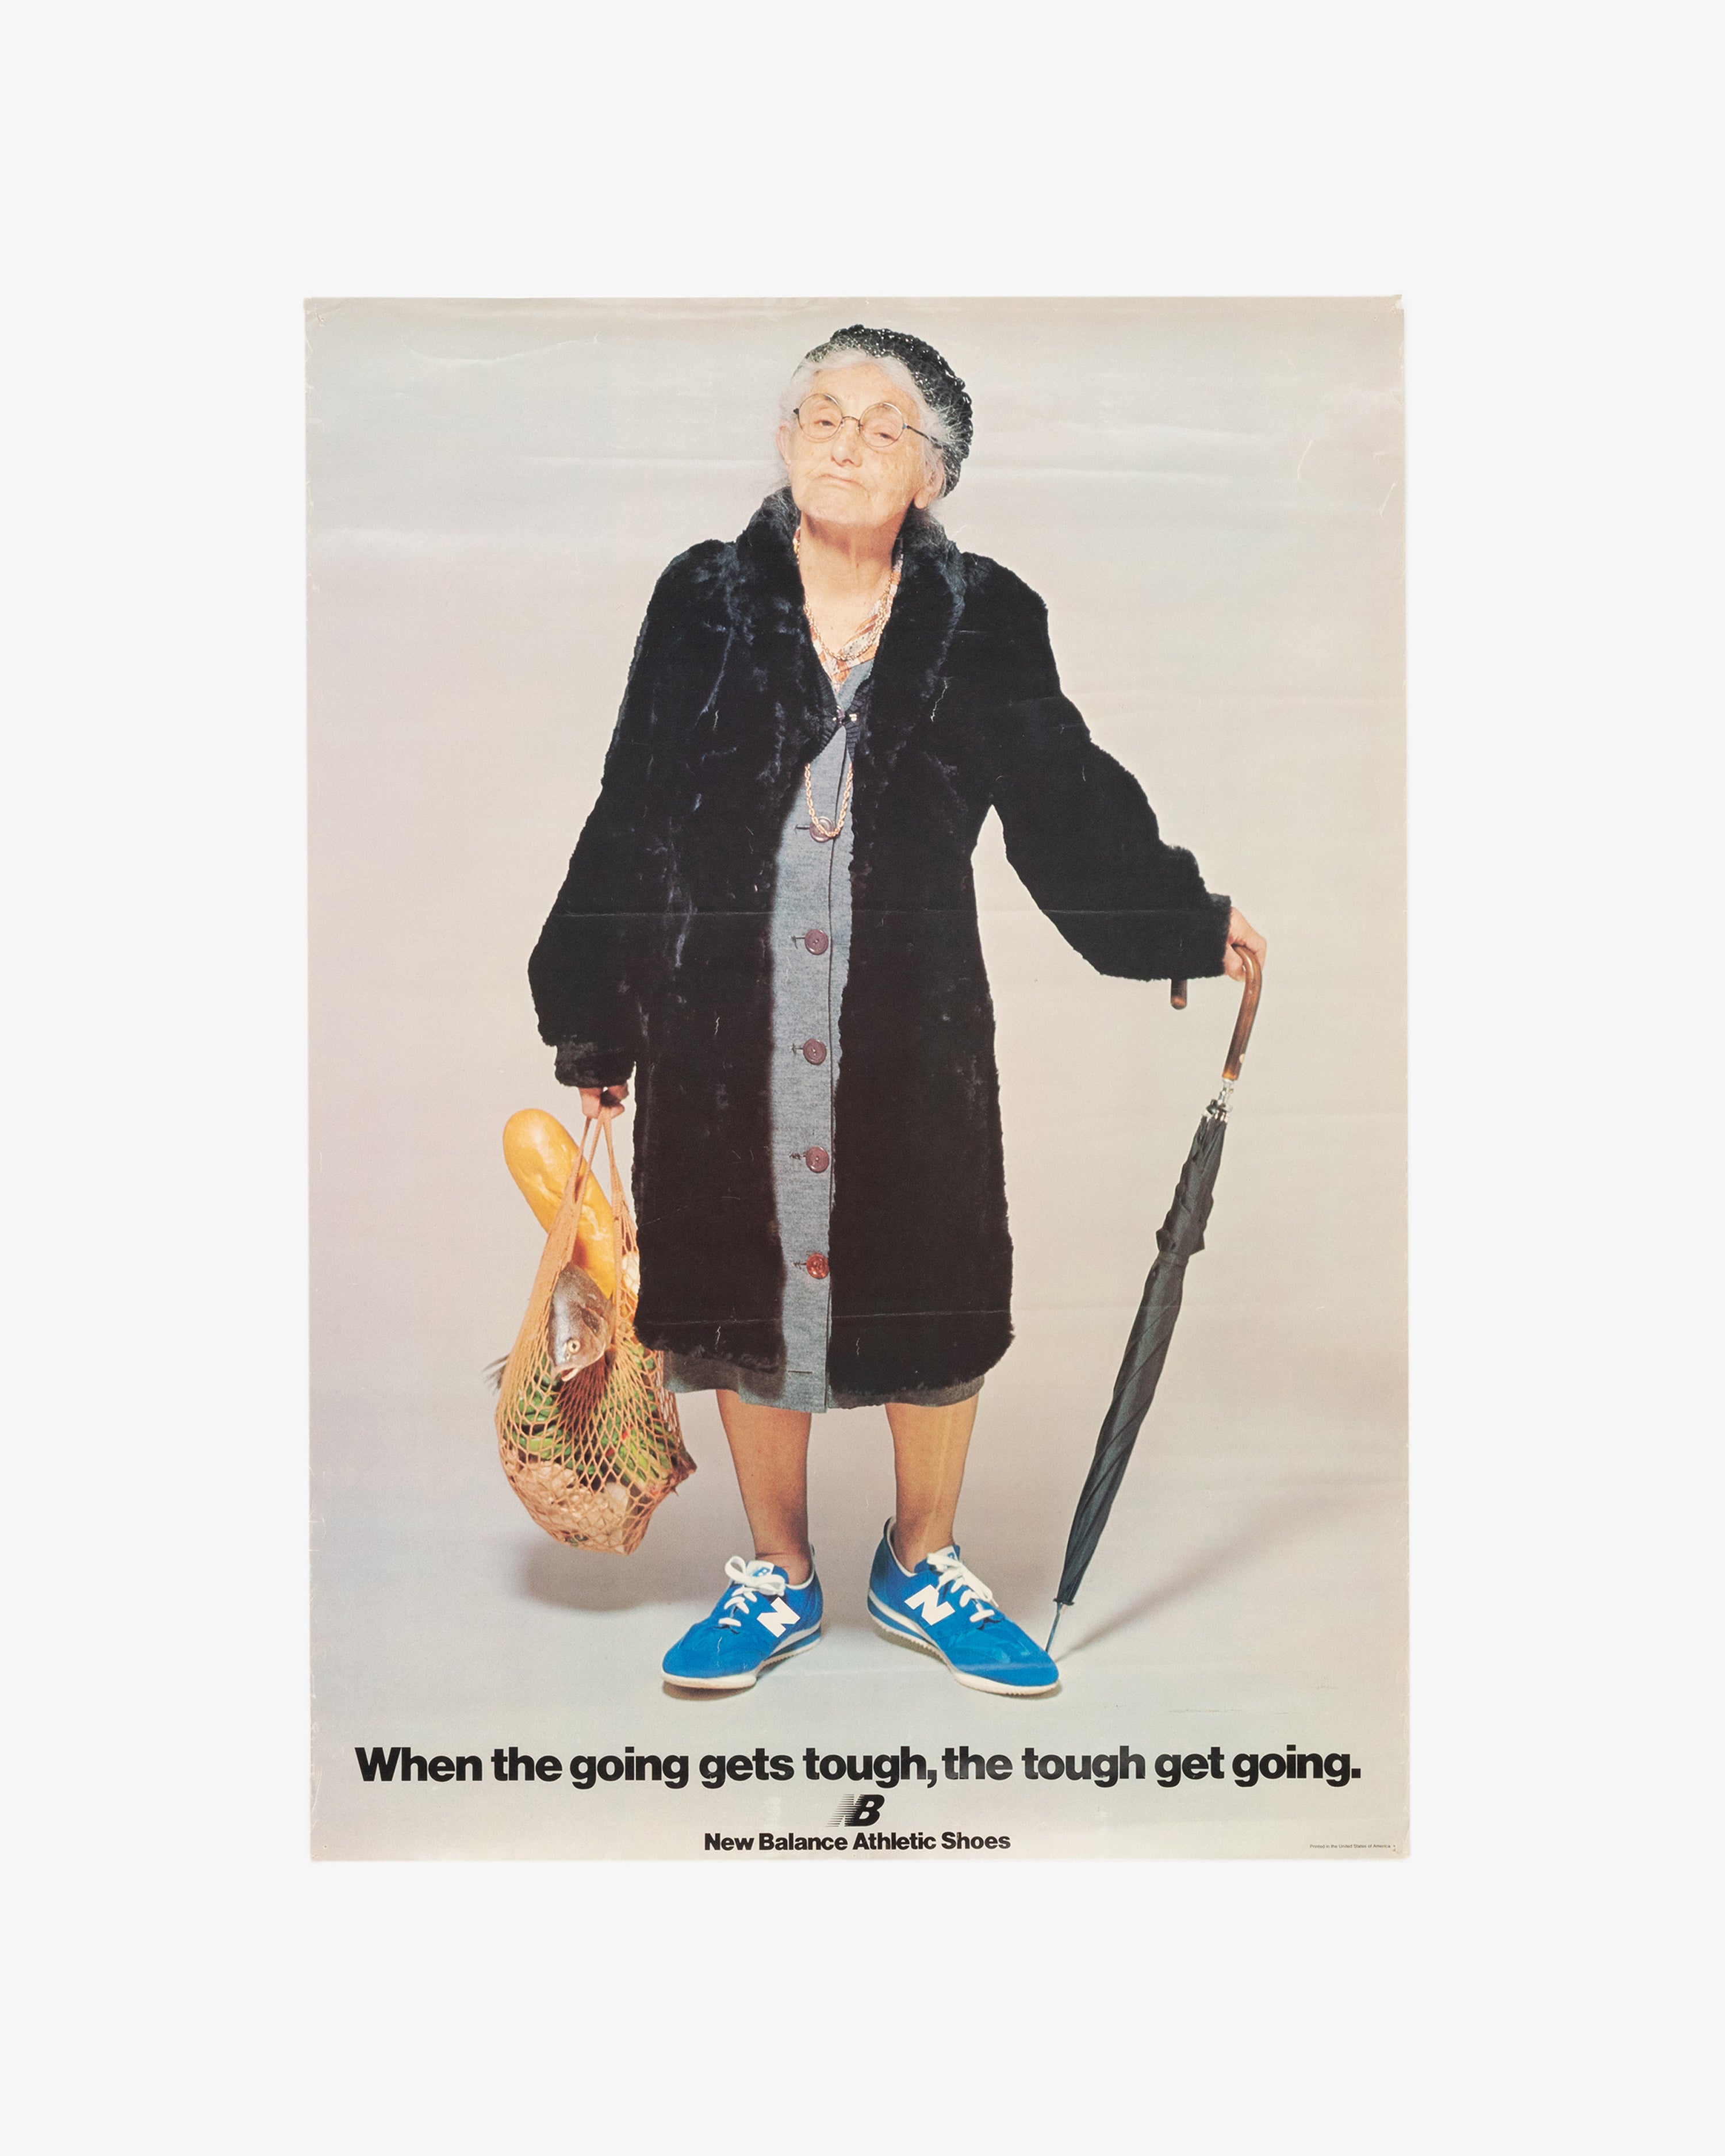 Original NB "When the Going Gets Tough" Poster